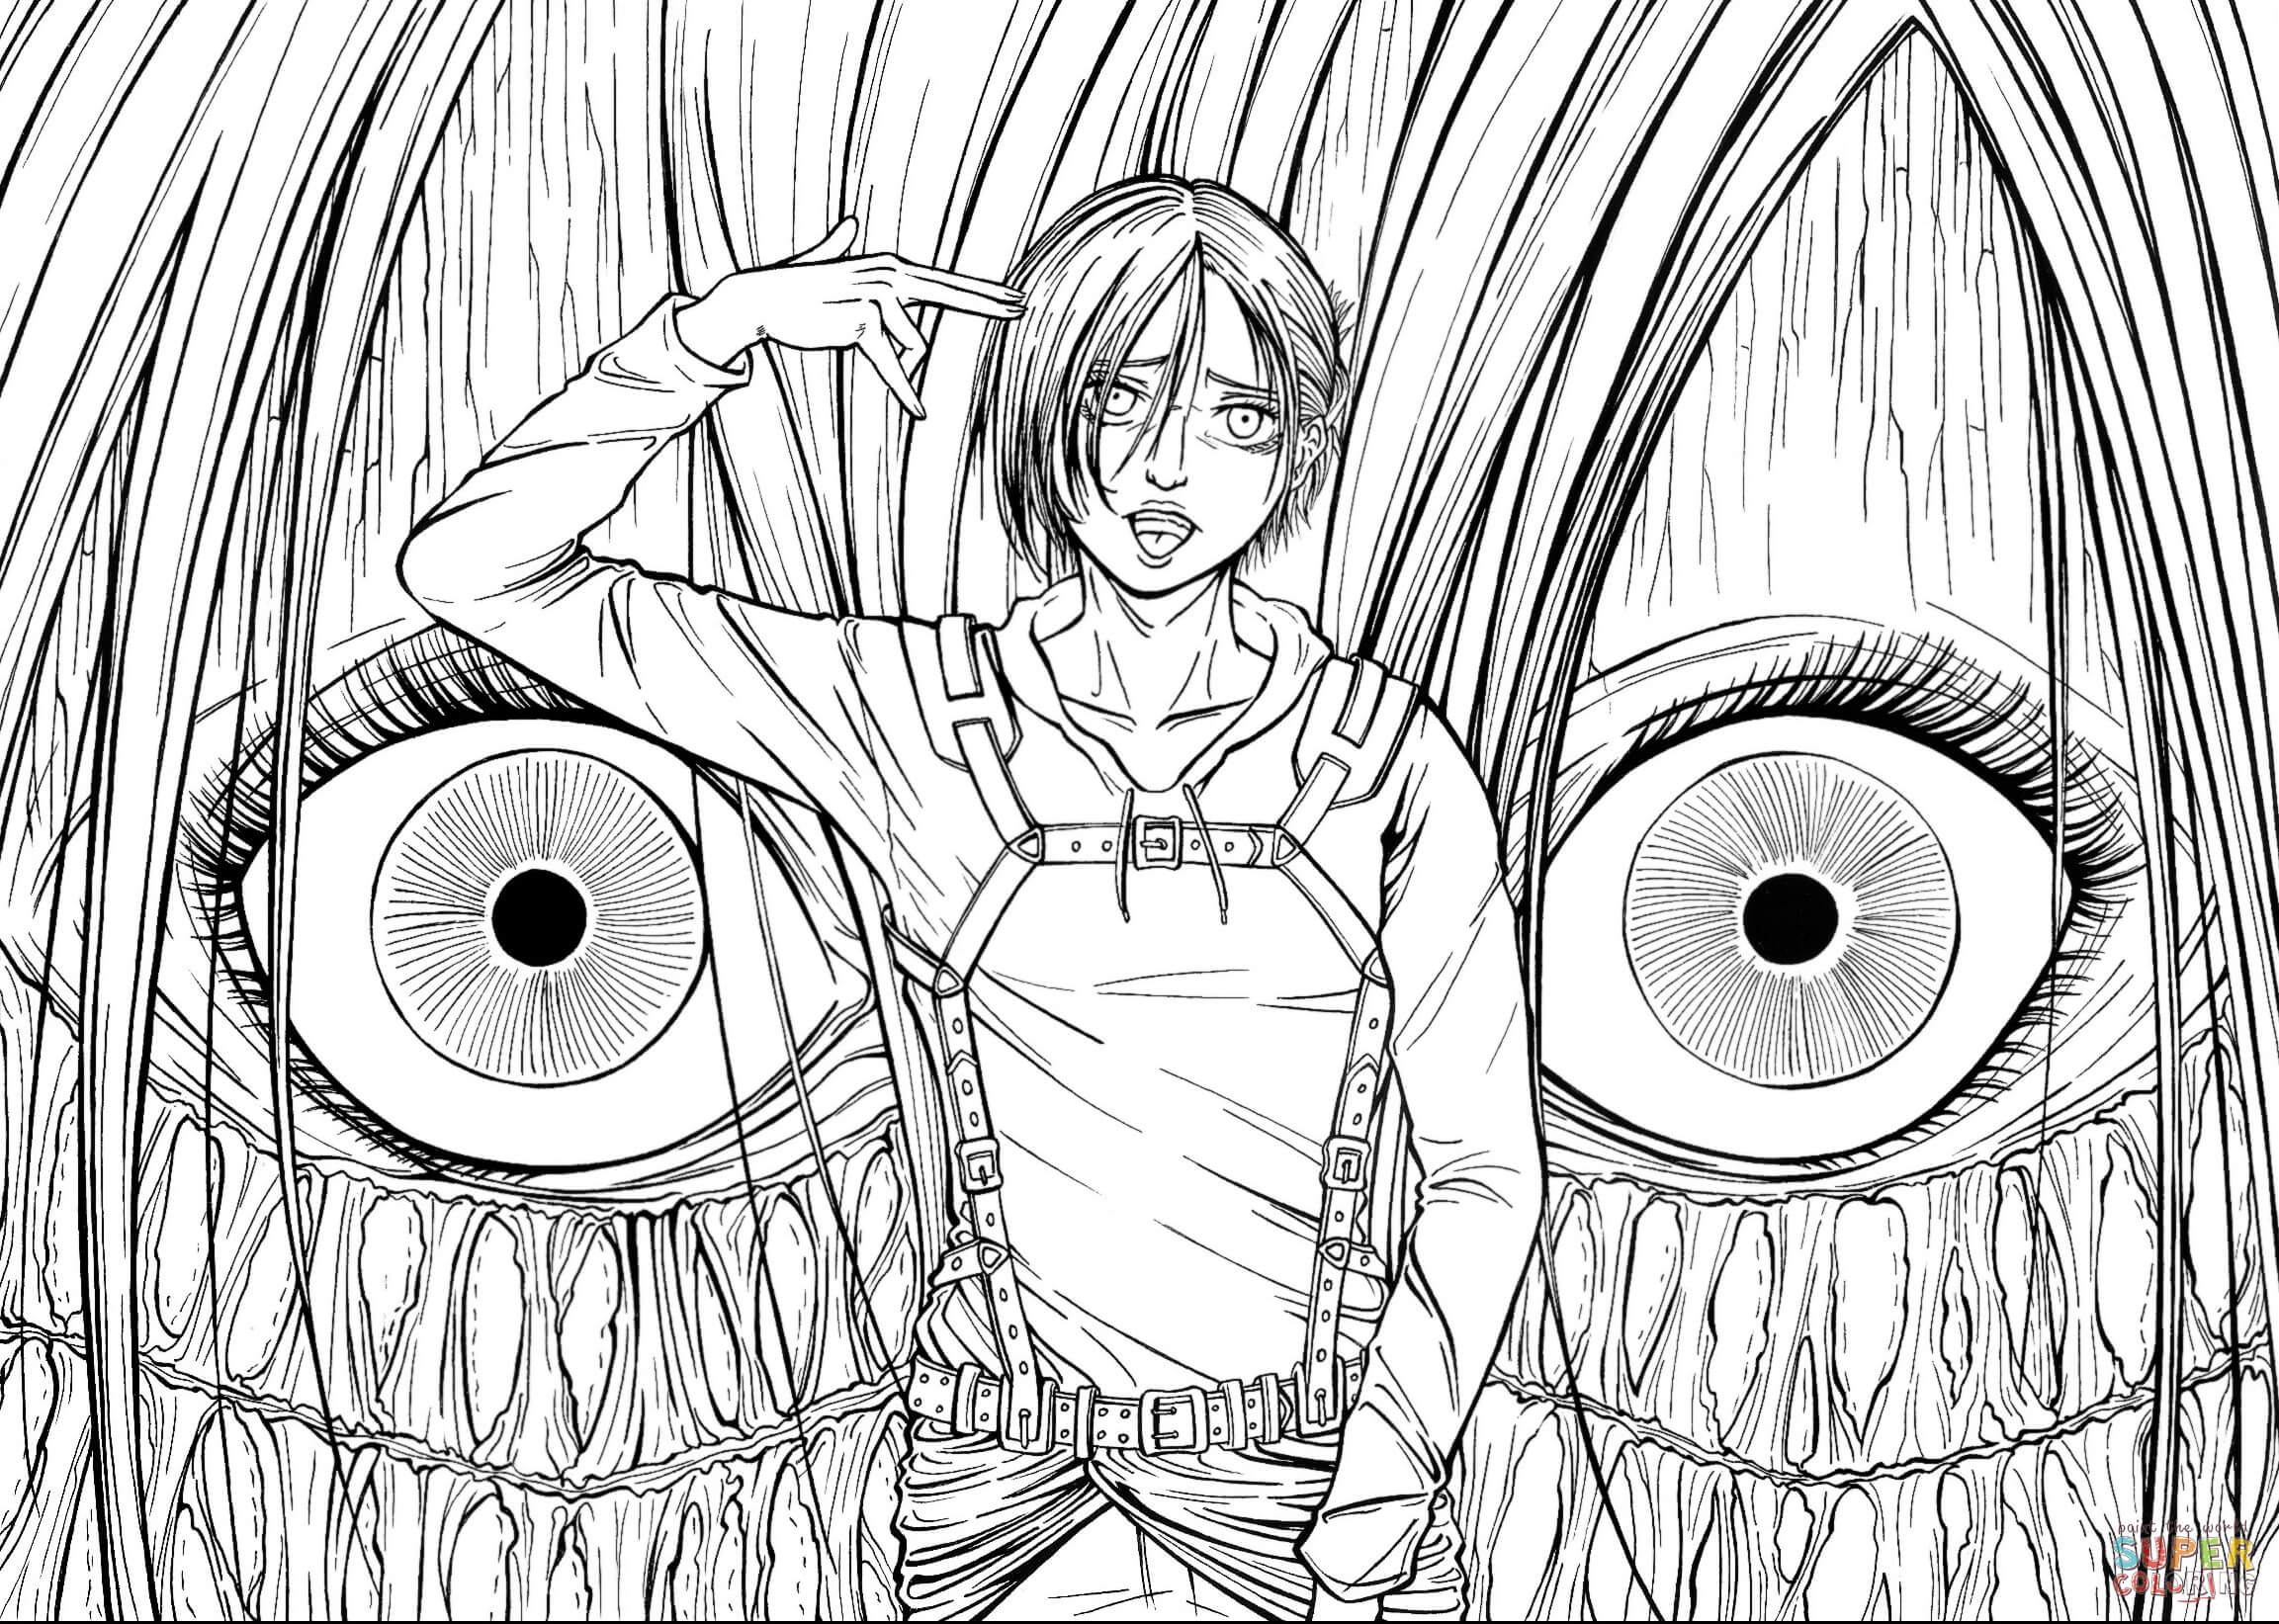 Annie leonhardt female titan from manga series shingeki no kyojin attack on titan advancing giants coloring page free printable coloring pages